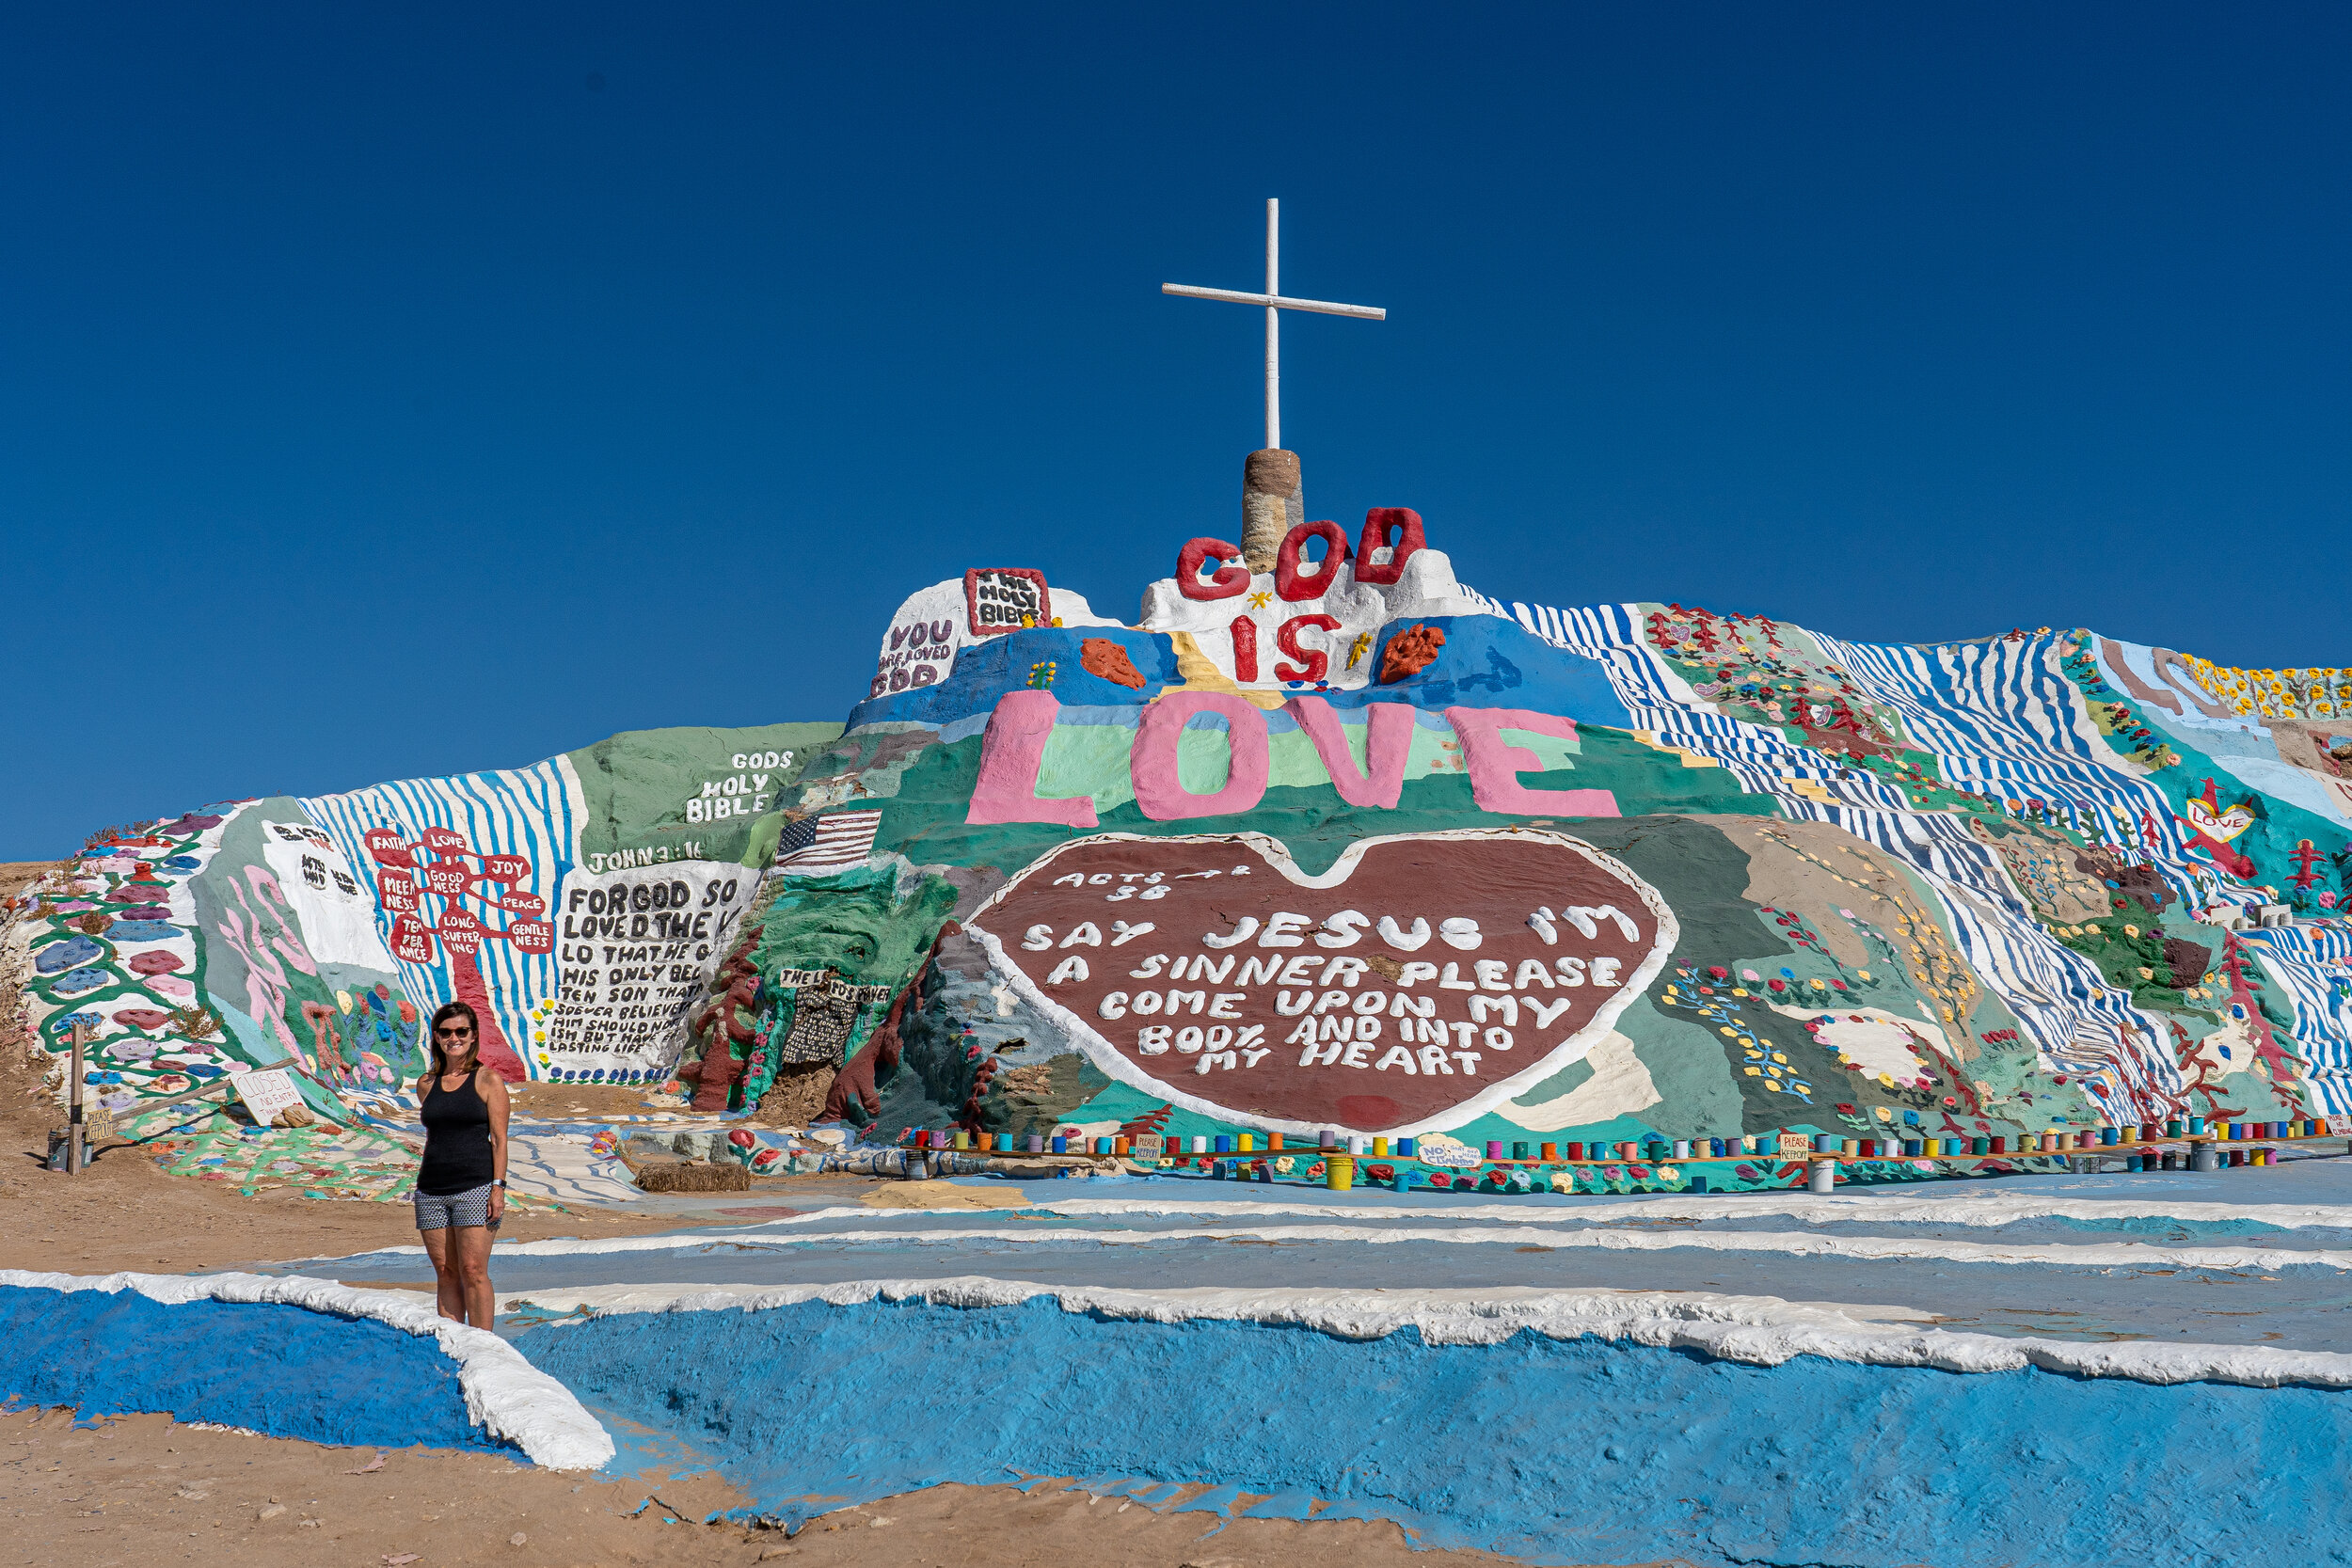  One person described  Salvation Mountain   as "Candy Land meets Vacation Bible School."  This mound of mud, hay, and over a million gallons of donated paint was a 28-year long project of Leonard Knight, the man who settled here and began to work on 